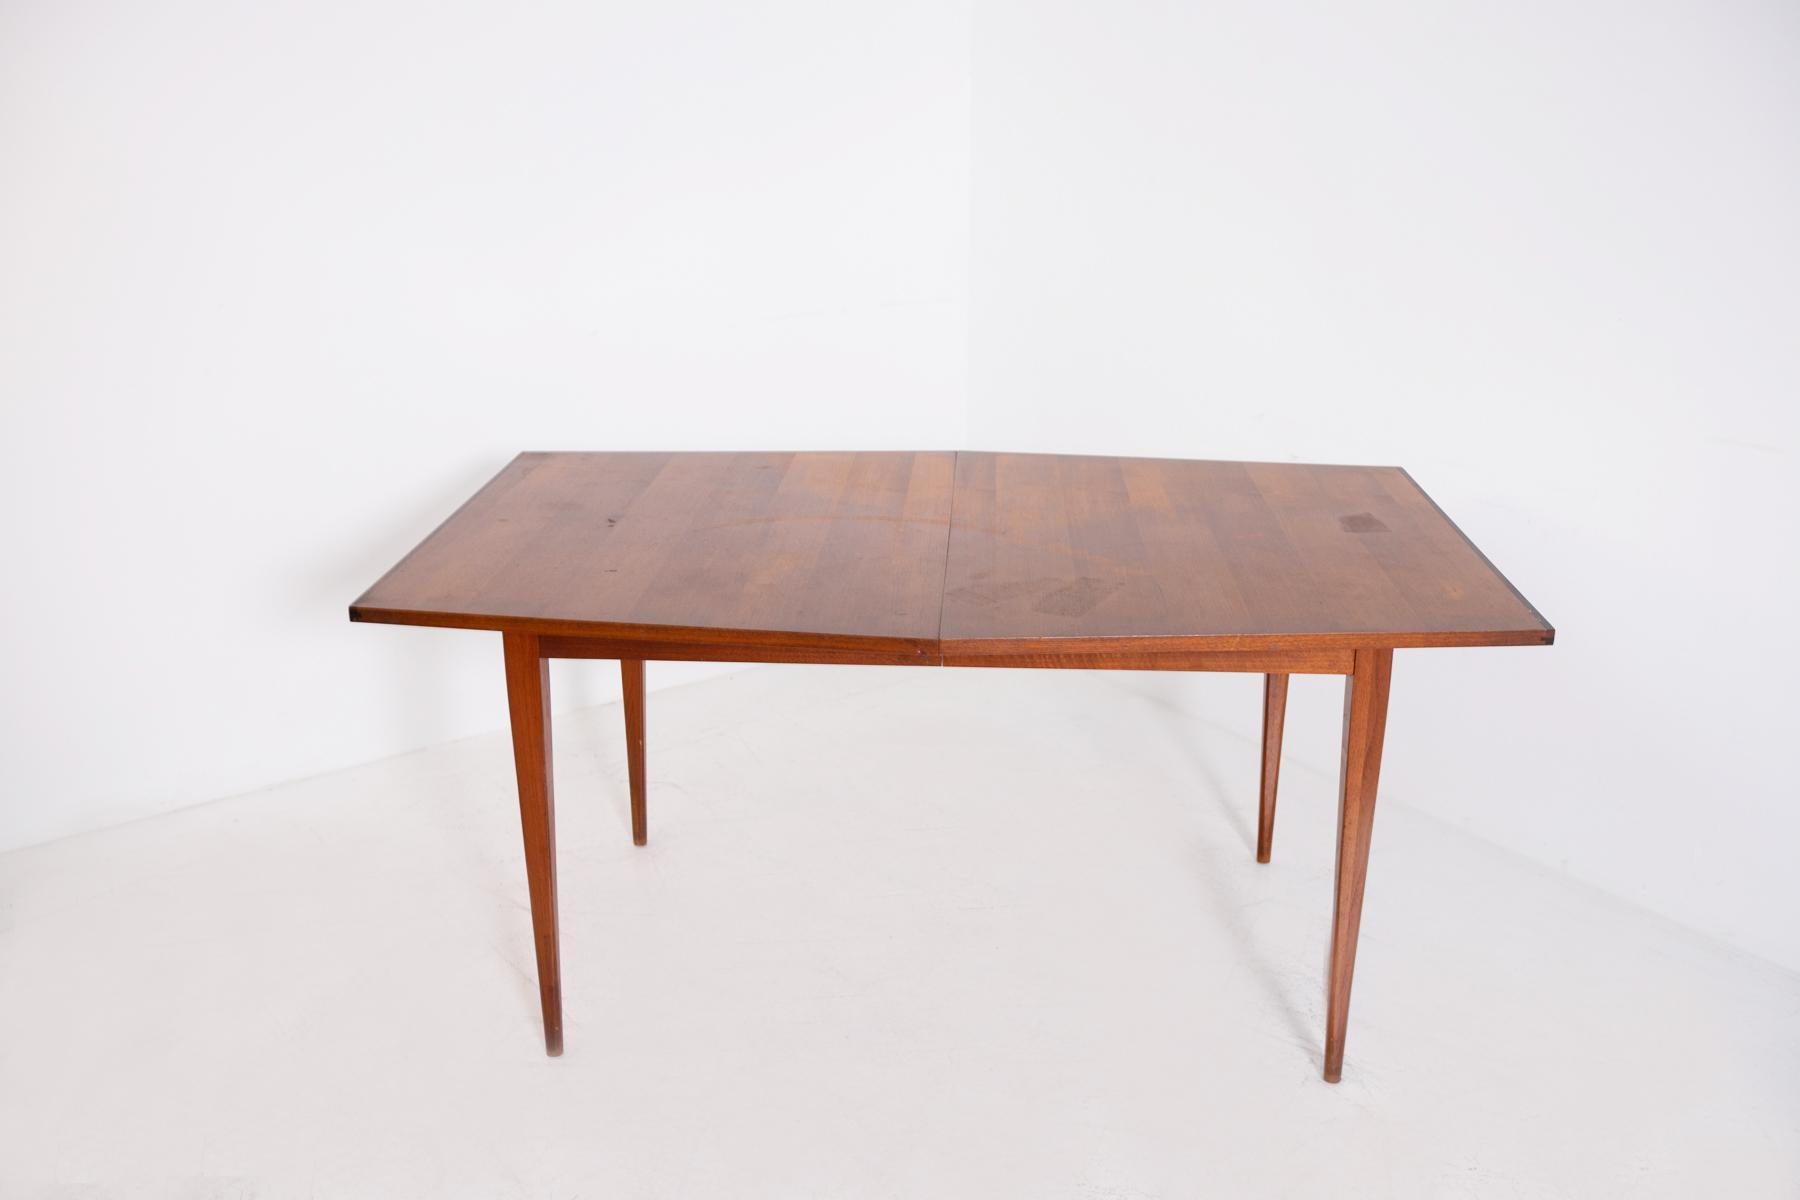 American-made geometric dining table from 1950. The table is made entirely of wood and presents interesting clean geometric shapes. Its almost hexagonal shape gives rigour and modernity to the product. Its legs, perfectly tapered in line with its